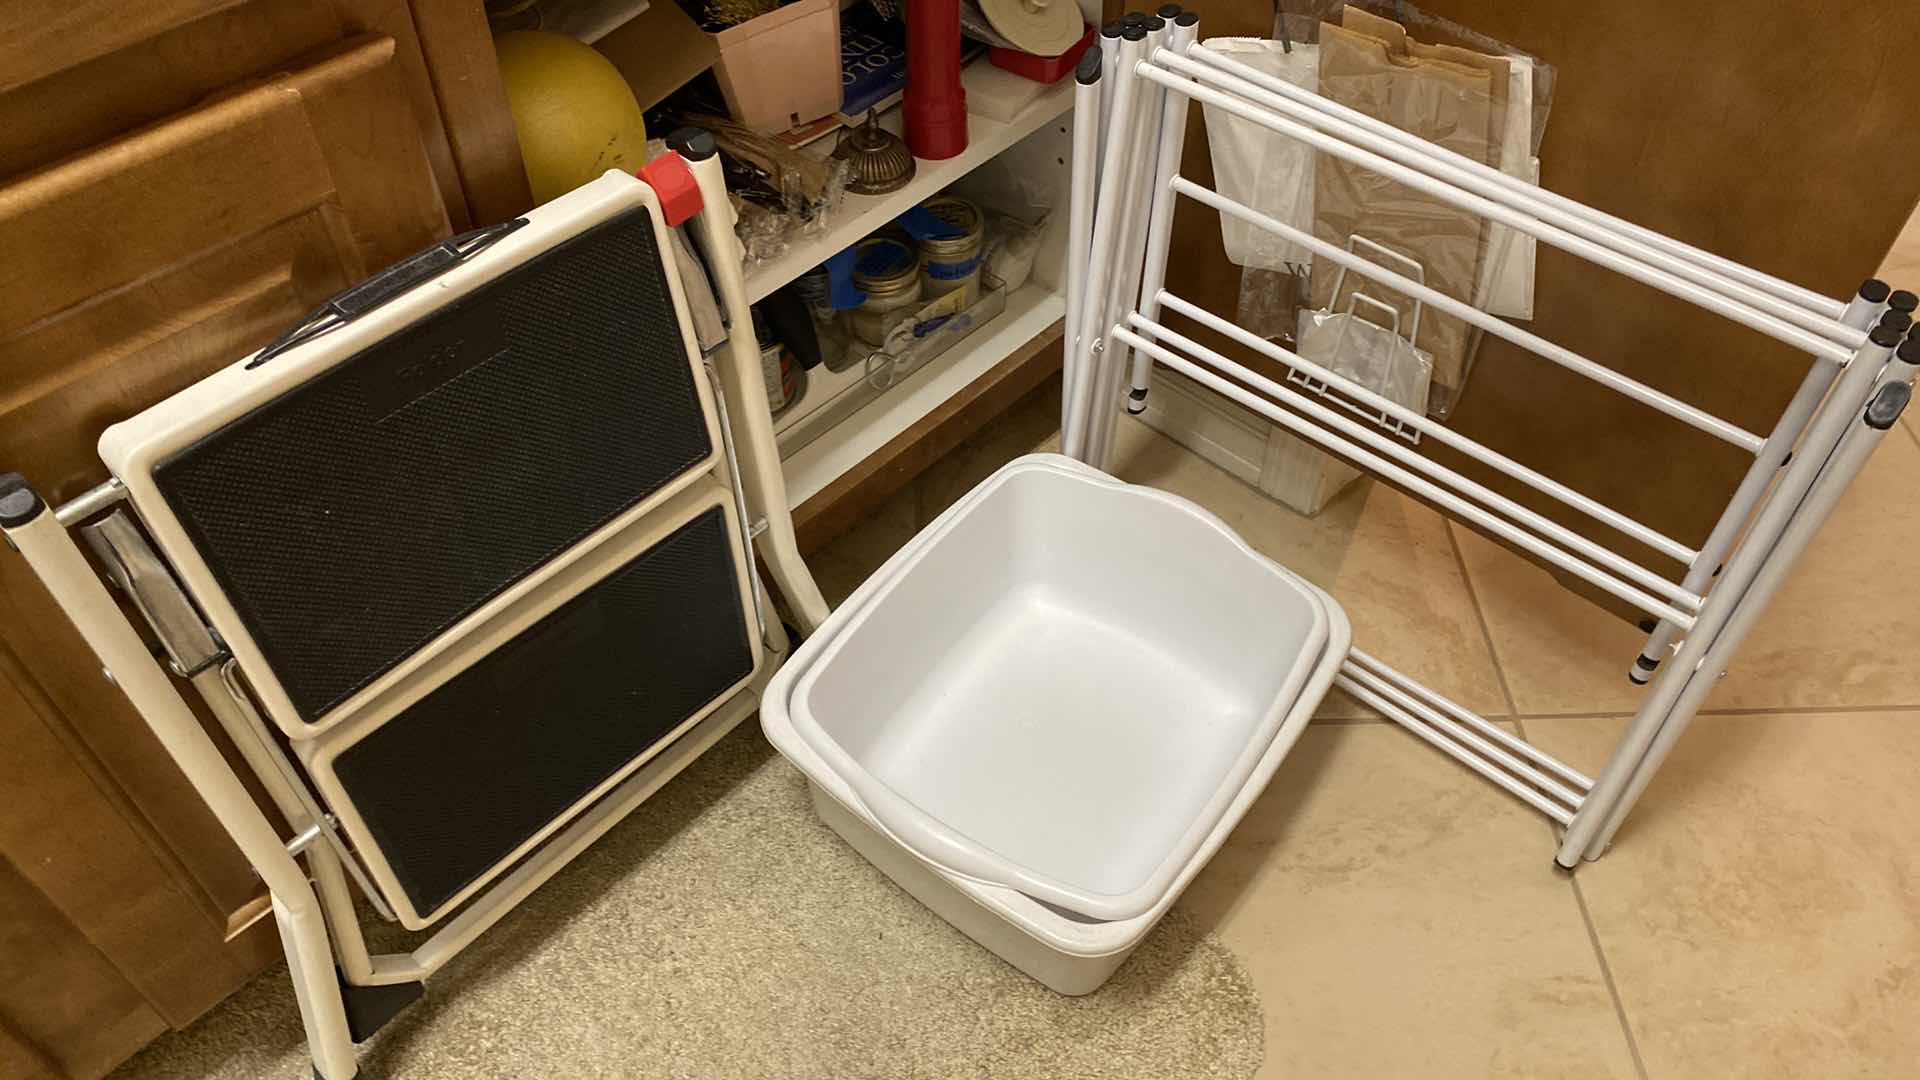 Photo 2 of CONTENTS OF CABINET LAUNDRY ROOM CABINET AND CLOTHES DRYING RACK STEP STOOL AND PLASTIC CONTAINERS